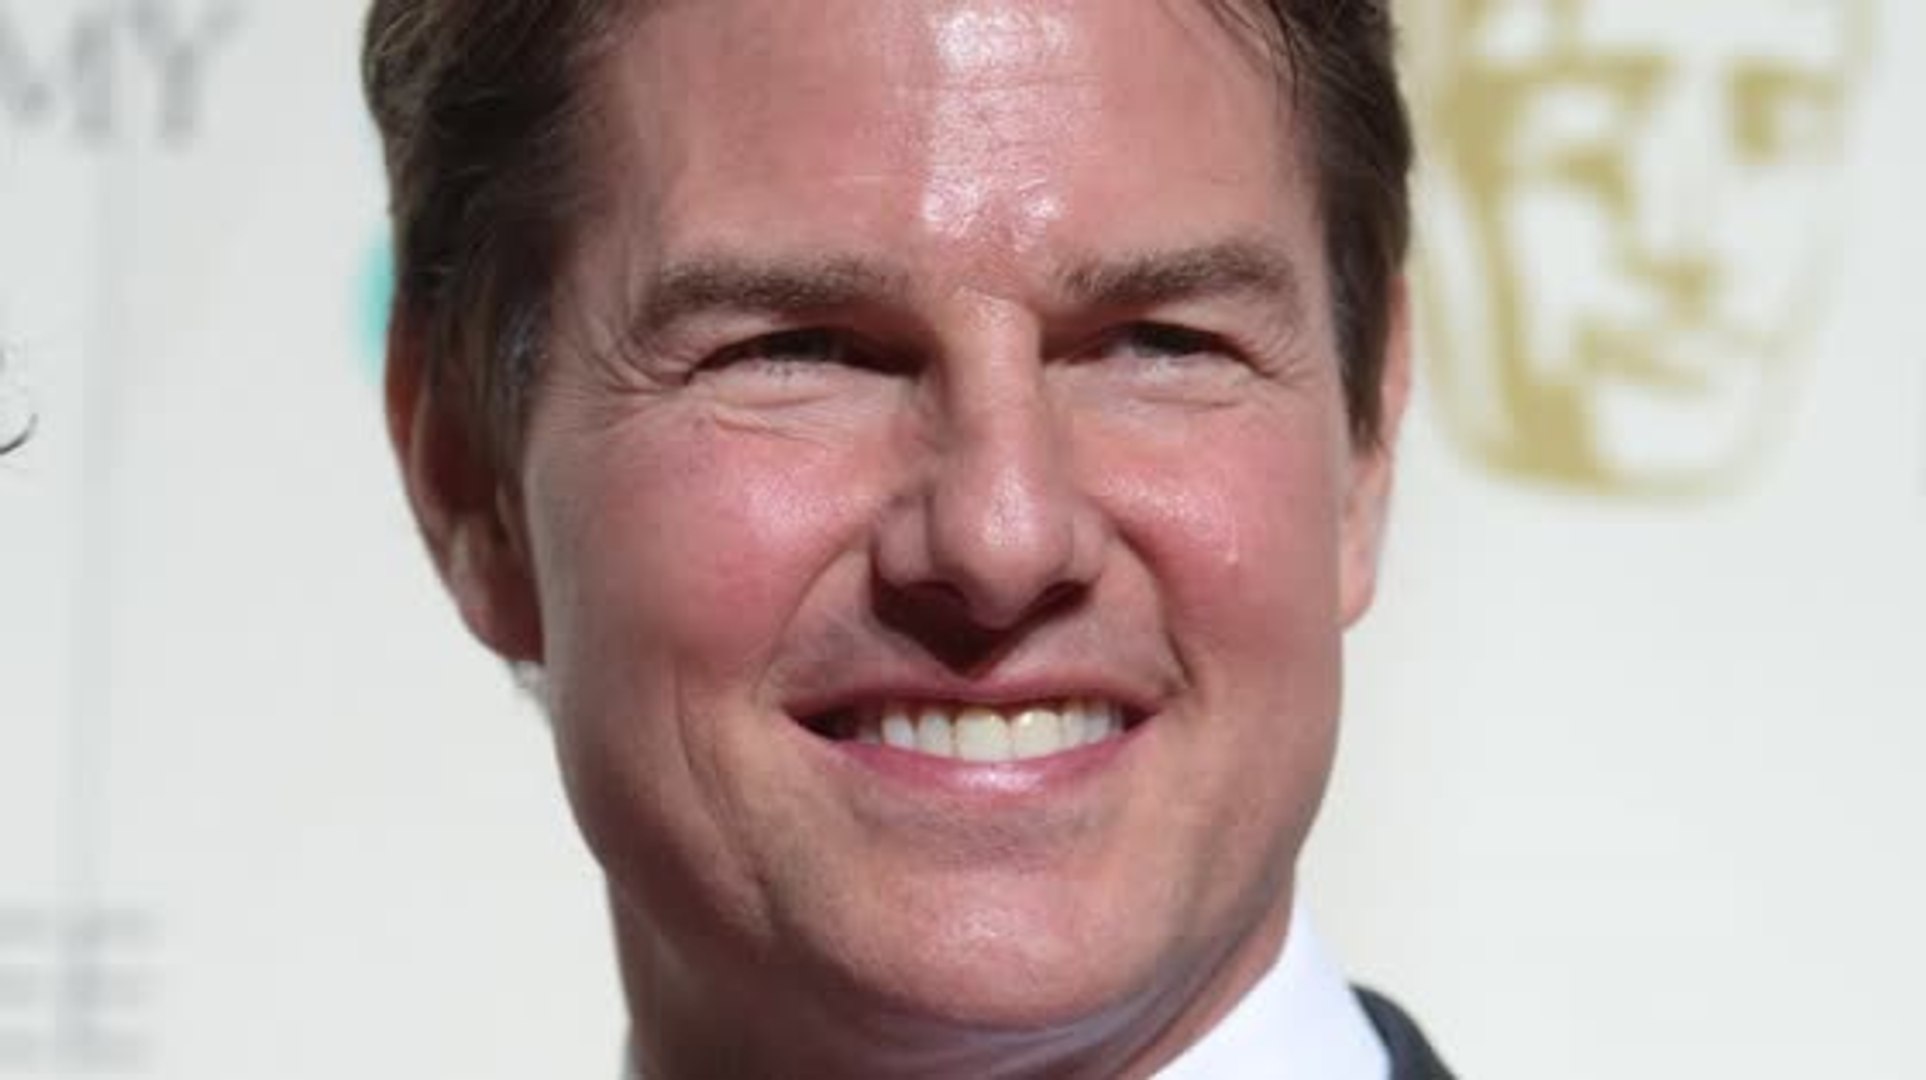 The Internet Accuses Tom Cruise of Overdoing Botox Injections - video  Dailymotion